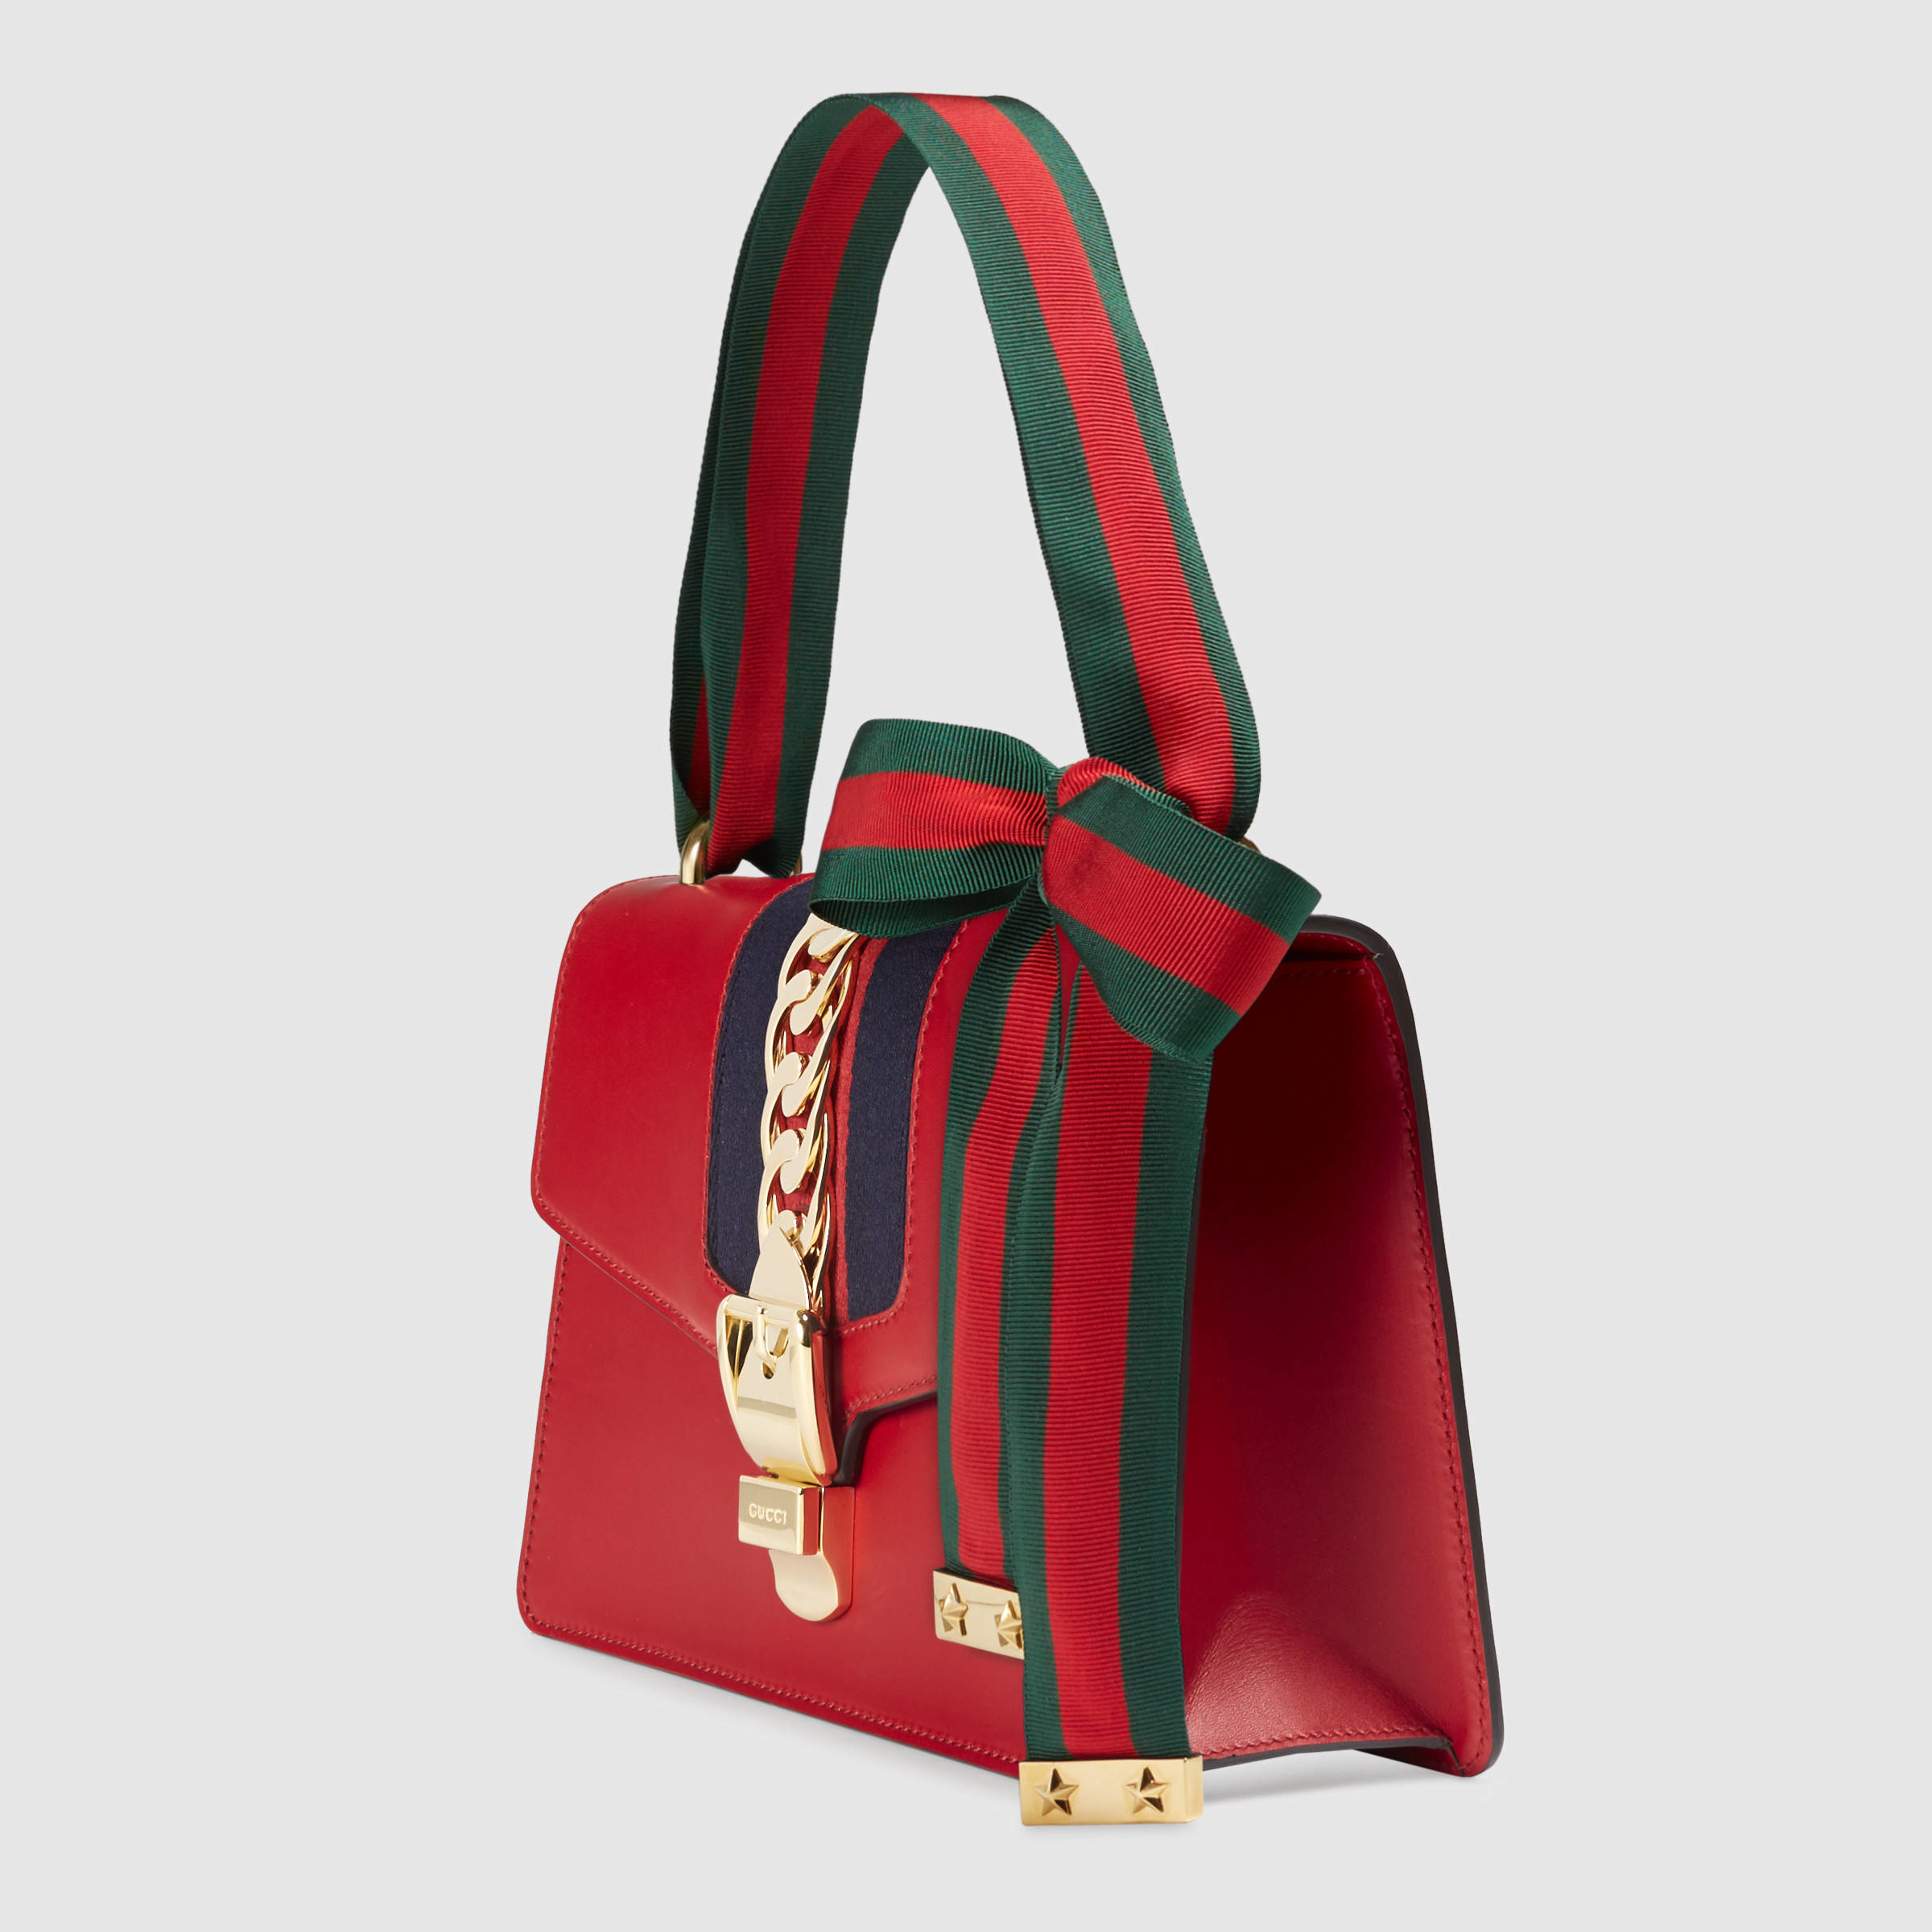 Gucci Sylvie Leather Shoulder Bag in Red | Lyst